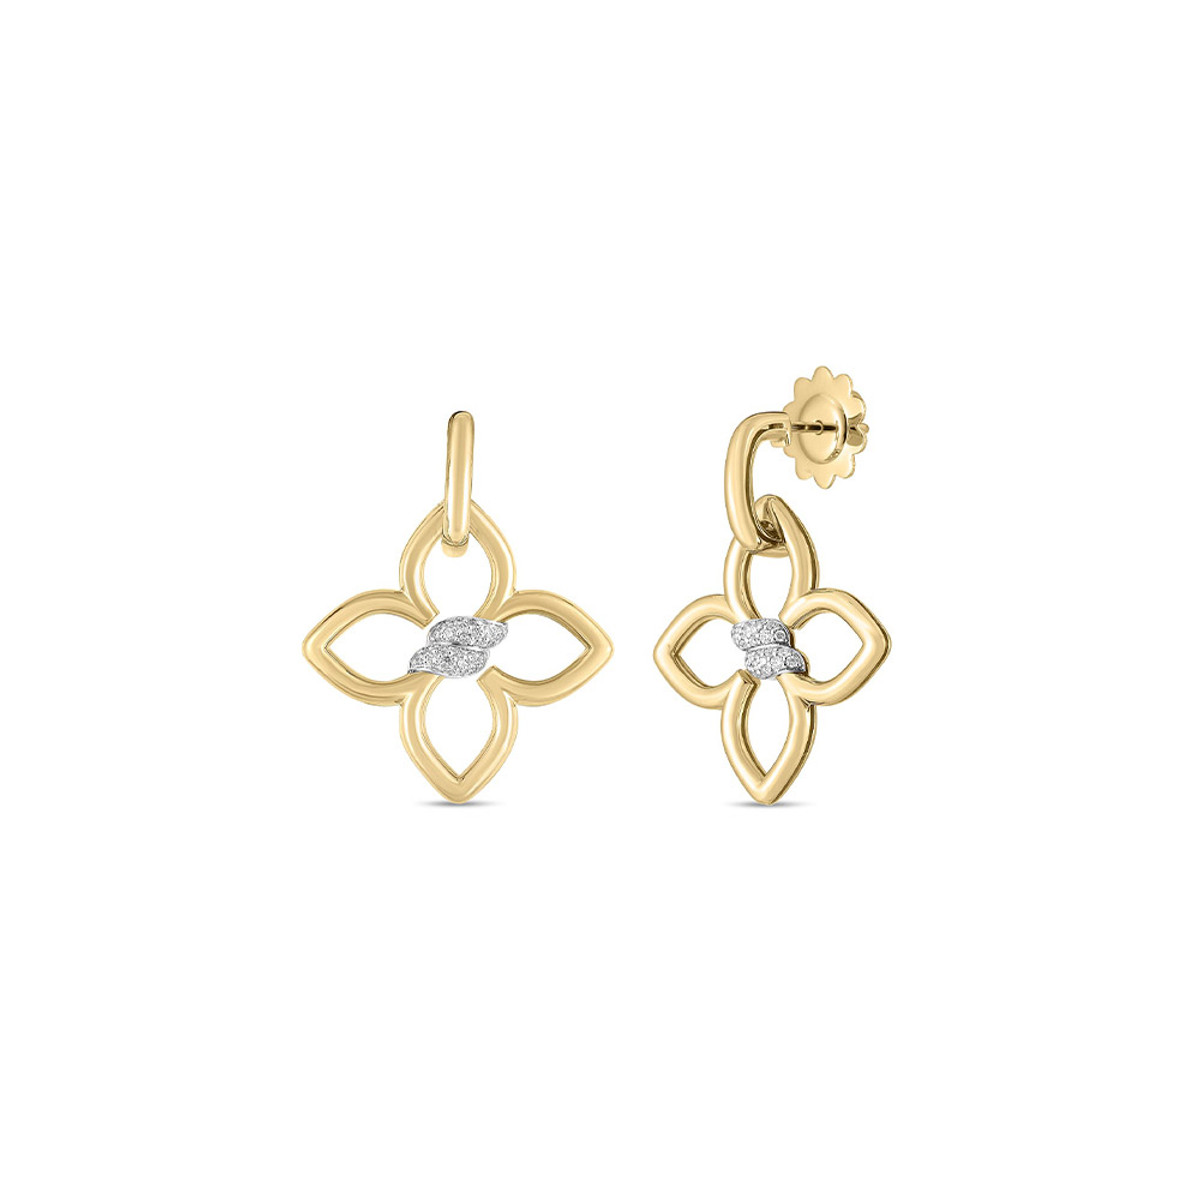 Roberto Coin 18K Yellow & White Gold Cialoma Diamond Flower Drop Earrings-57403 Product Image